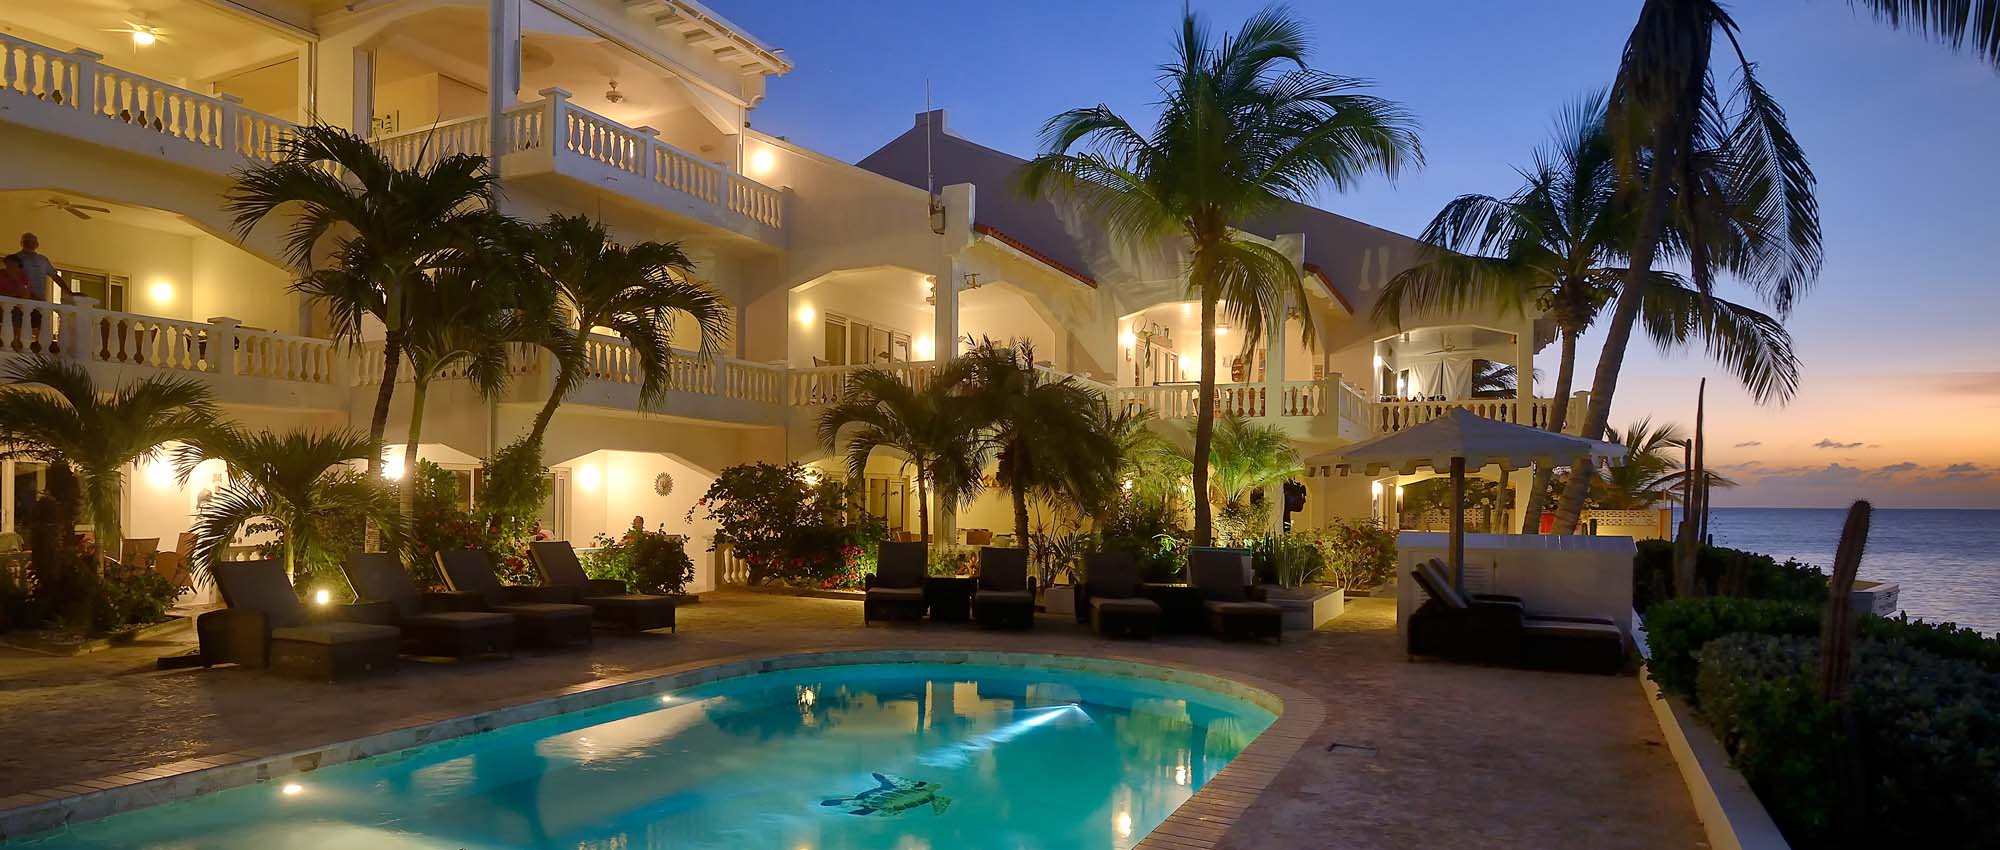 Outdoor pool area with ocean view and palm trees